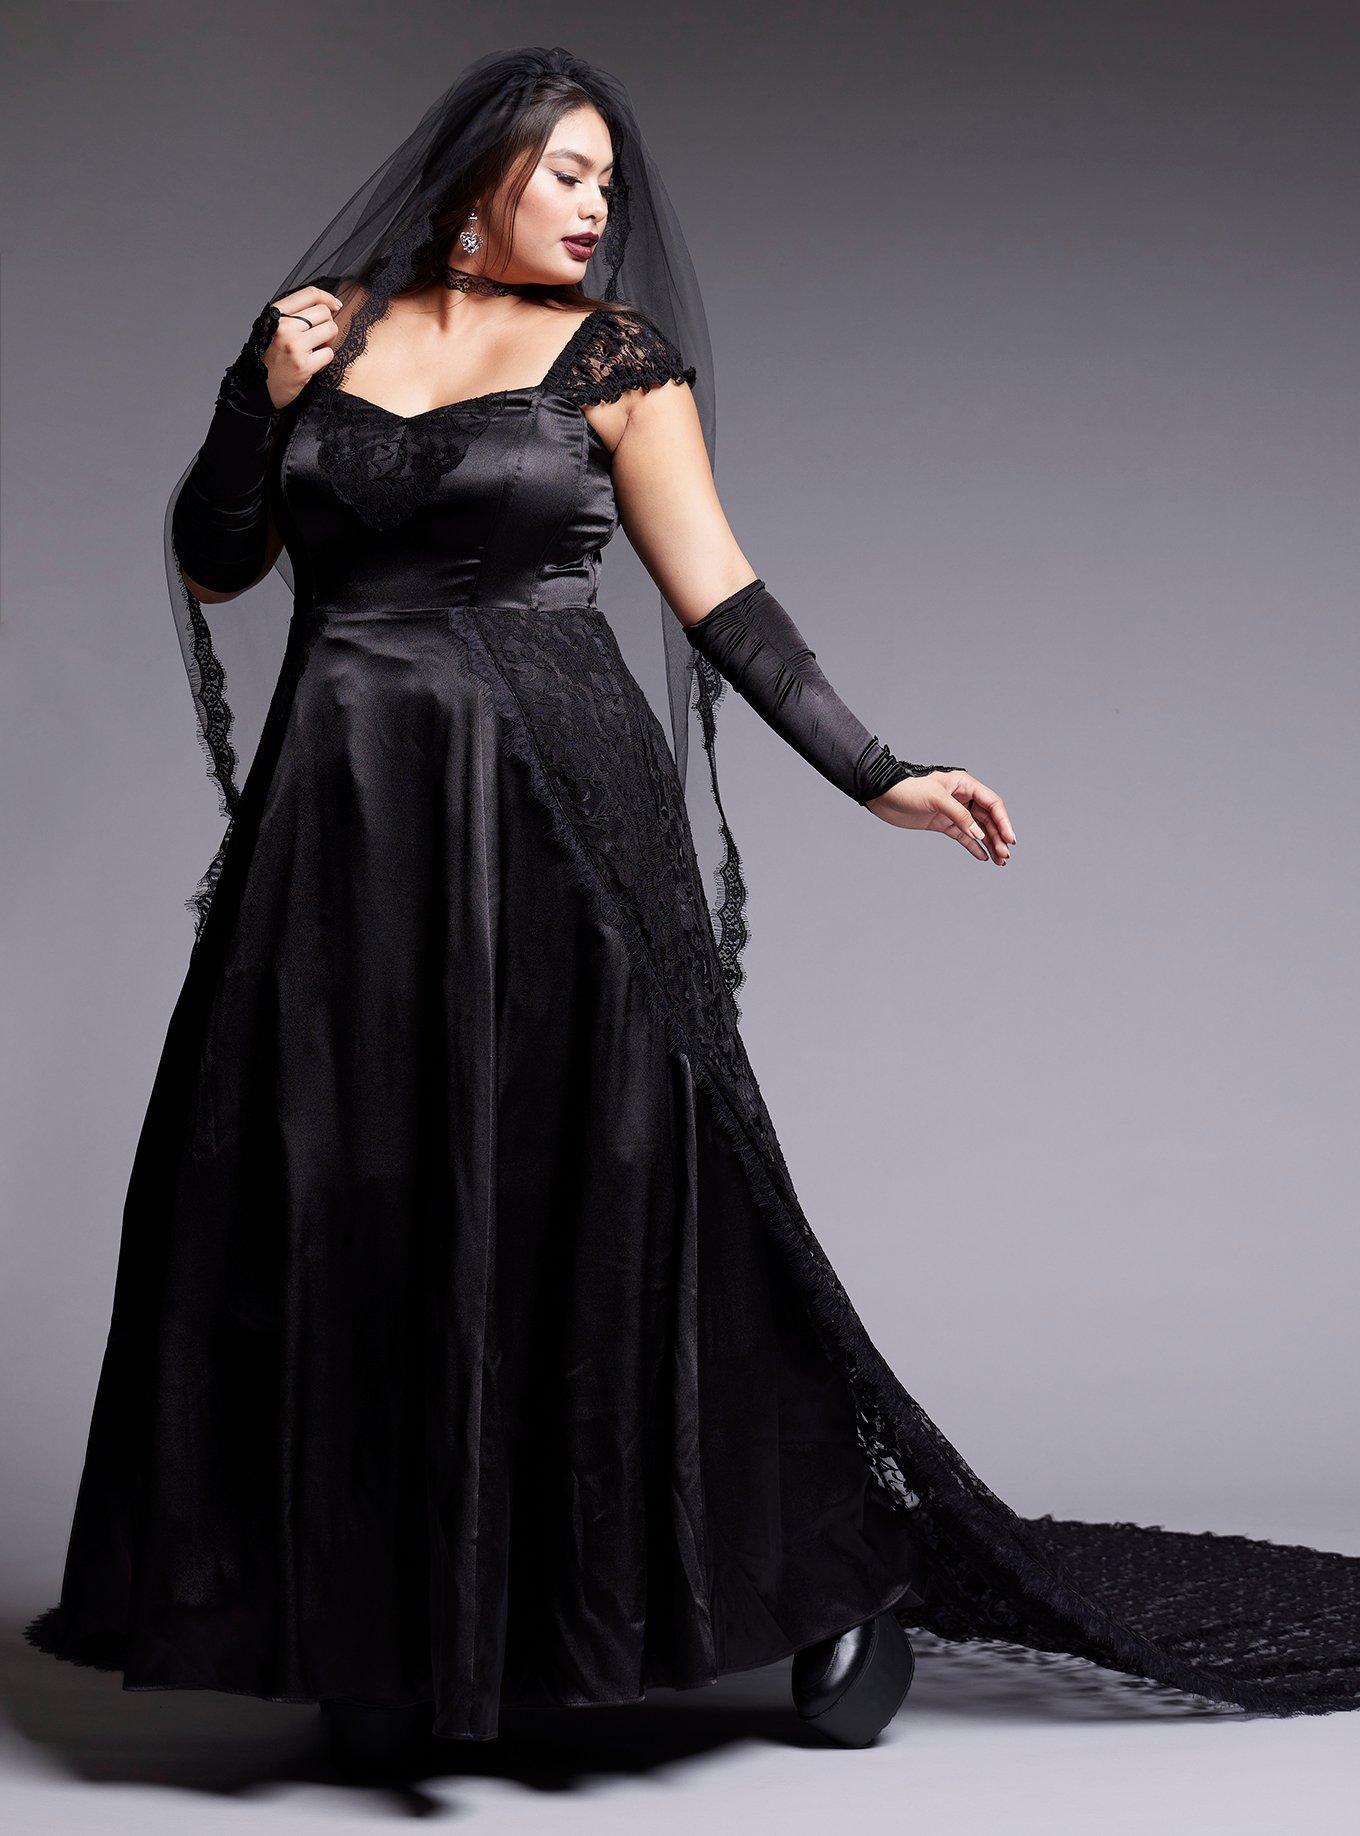 Black Lace Gothic Special Occasion Dress Plus Size Limited Edition, BLACK, hi-res